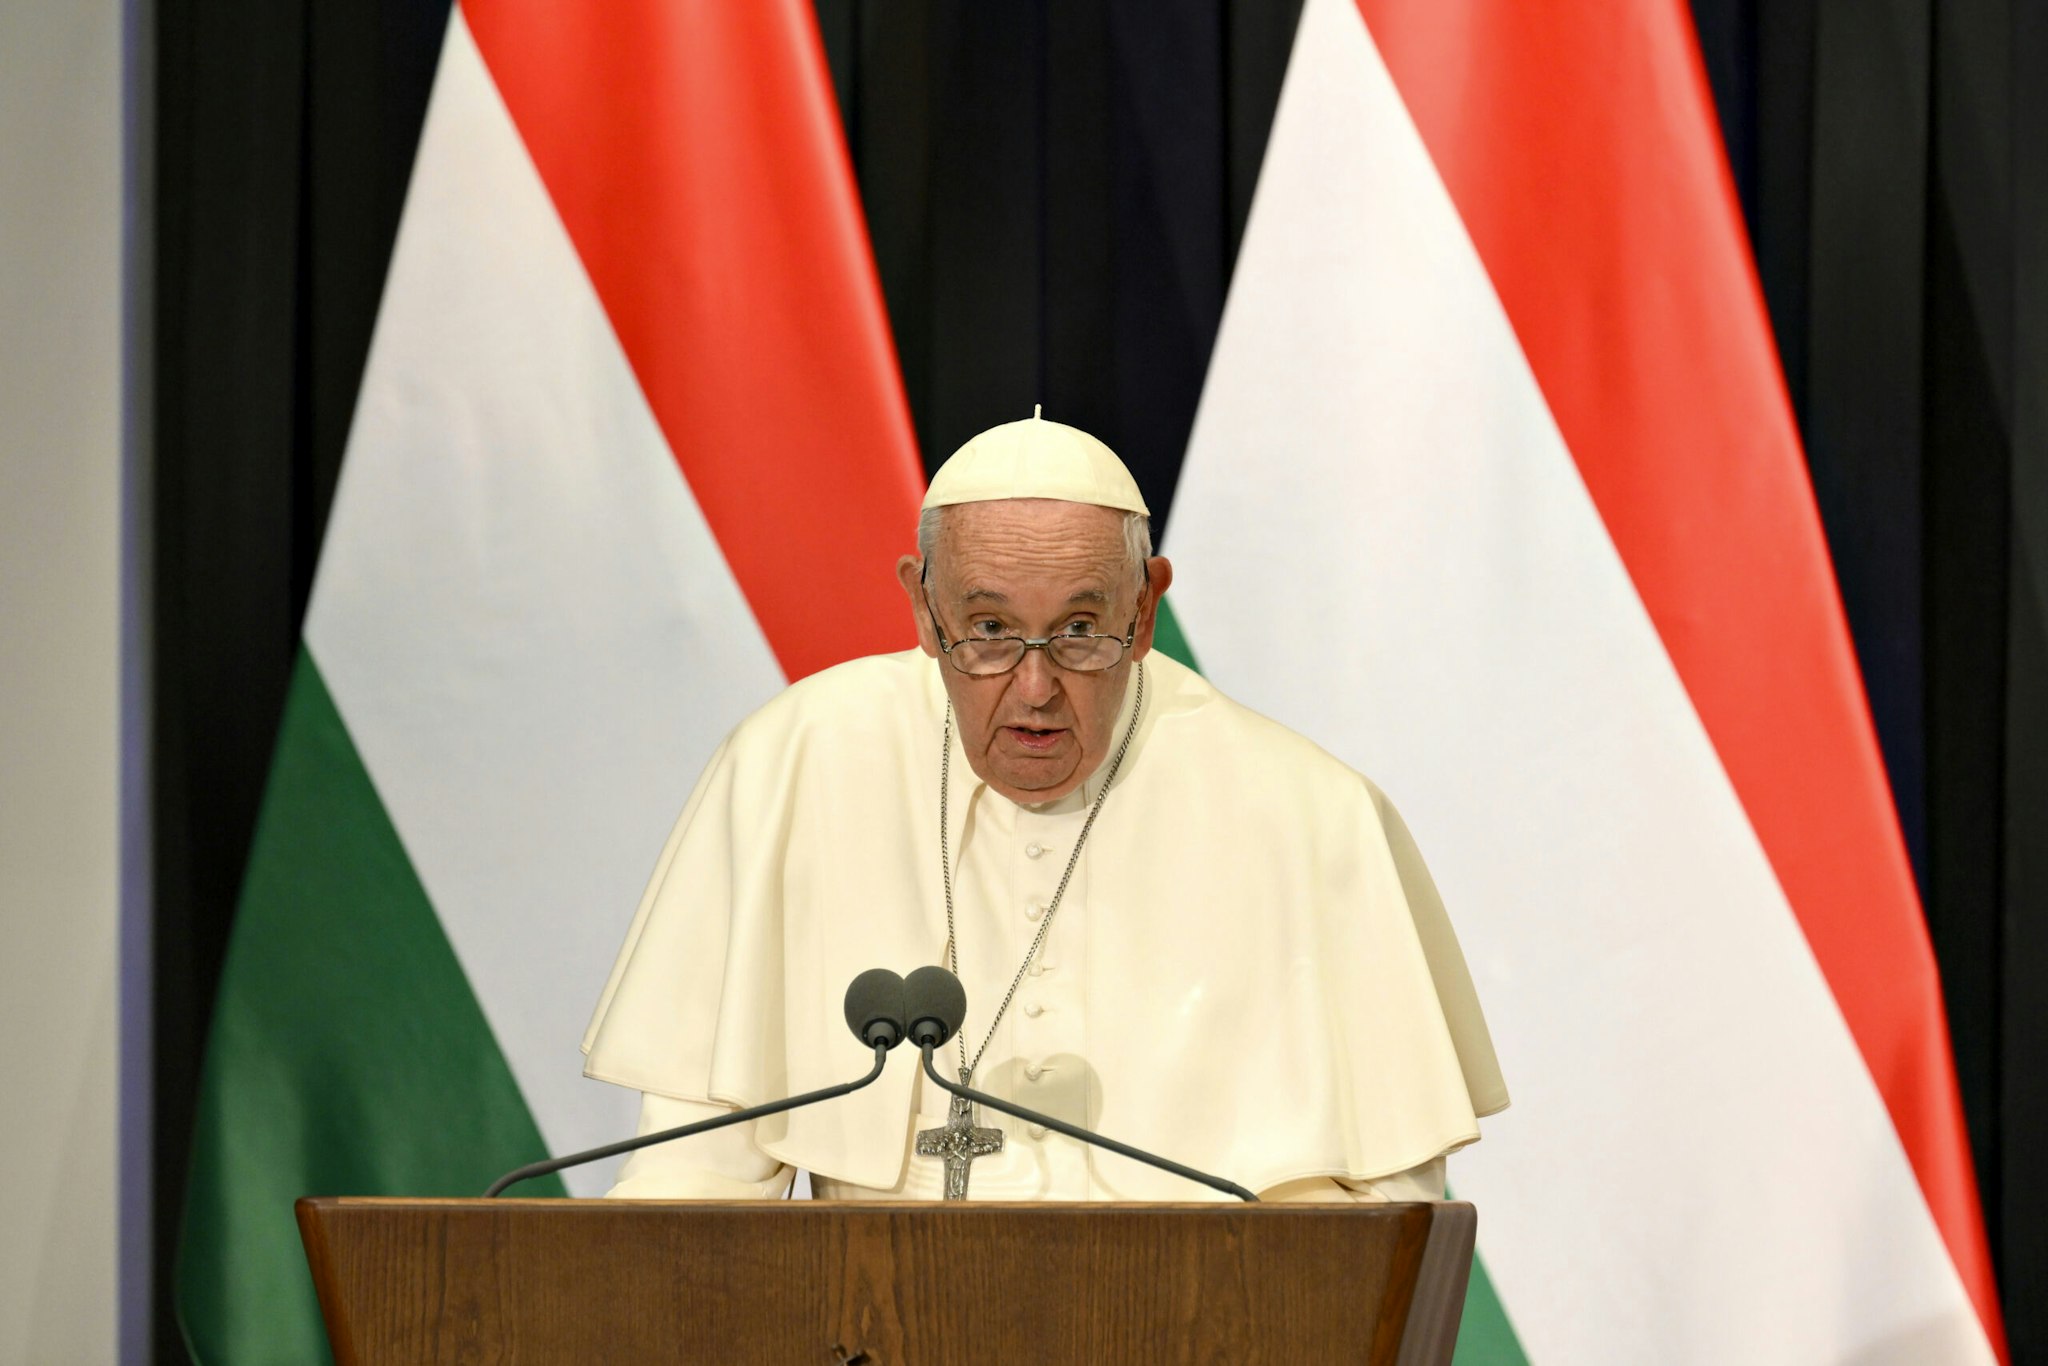 Pope Francis flanked by Hungarian President Katalin Novák holds his speech during a meeting with local authorities at Sándor Palace on April 28, 2023 in Budapest, Hungary. Pope Francis makes a three-day visit to the Central European nation's capital for his 41st Apostolic Journey abroad.